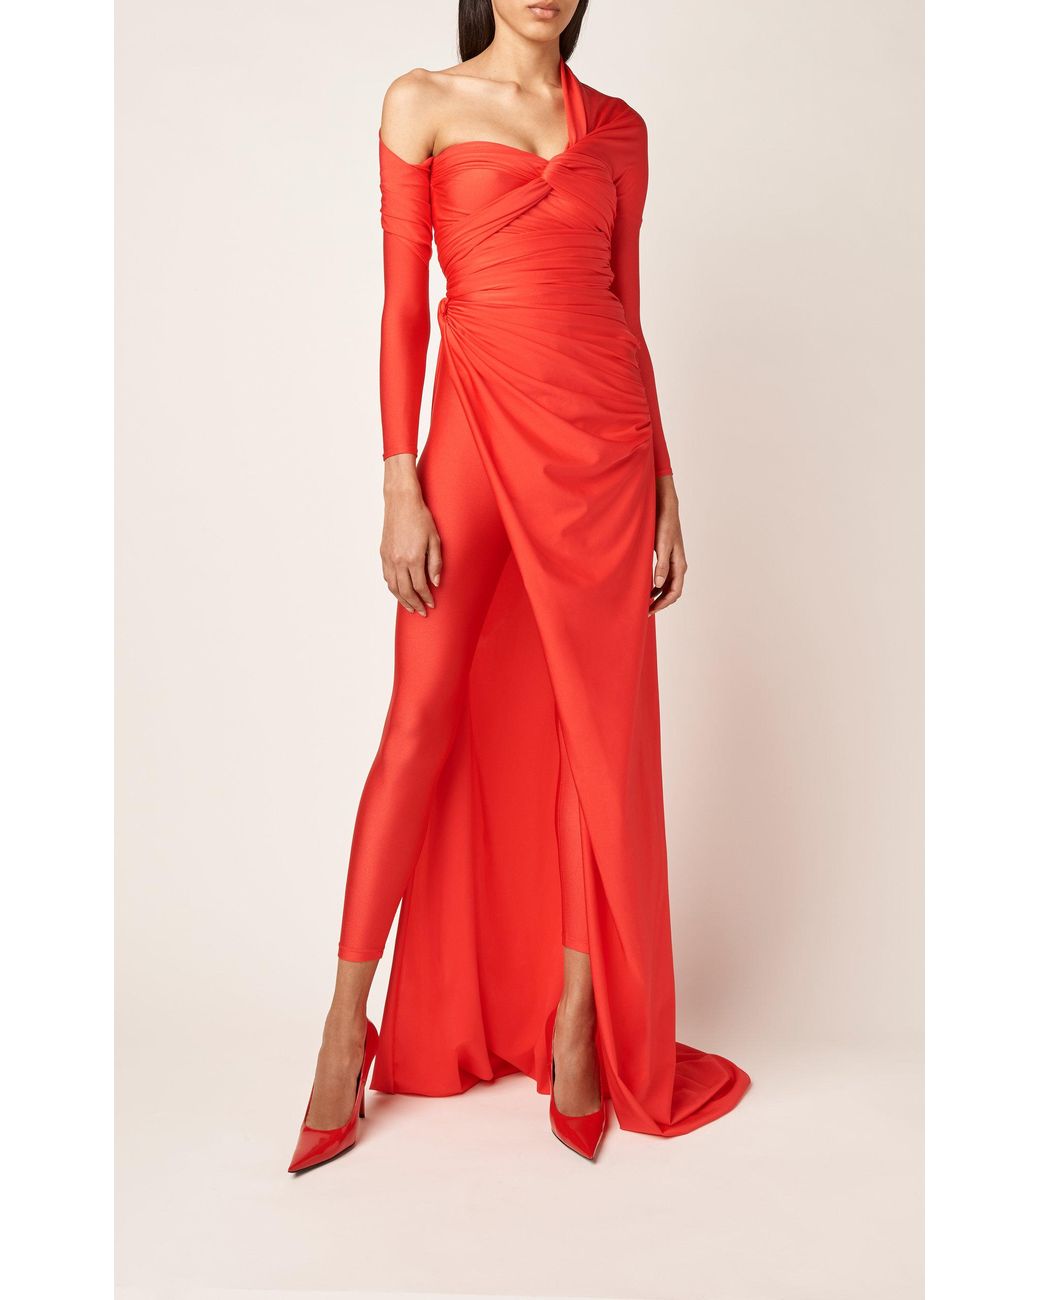 Balenciaga Synthetic Draped Jersey Gown in Red | Lyst